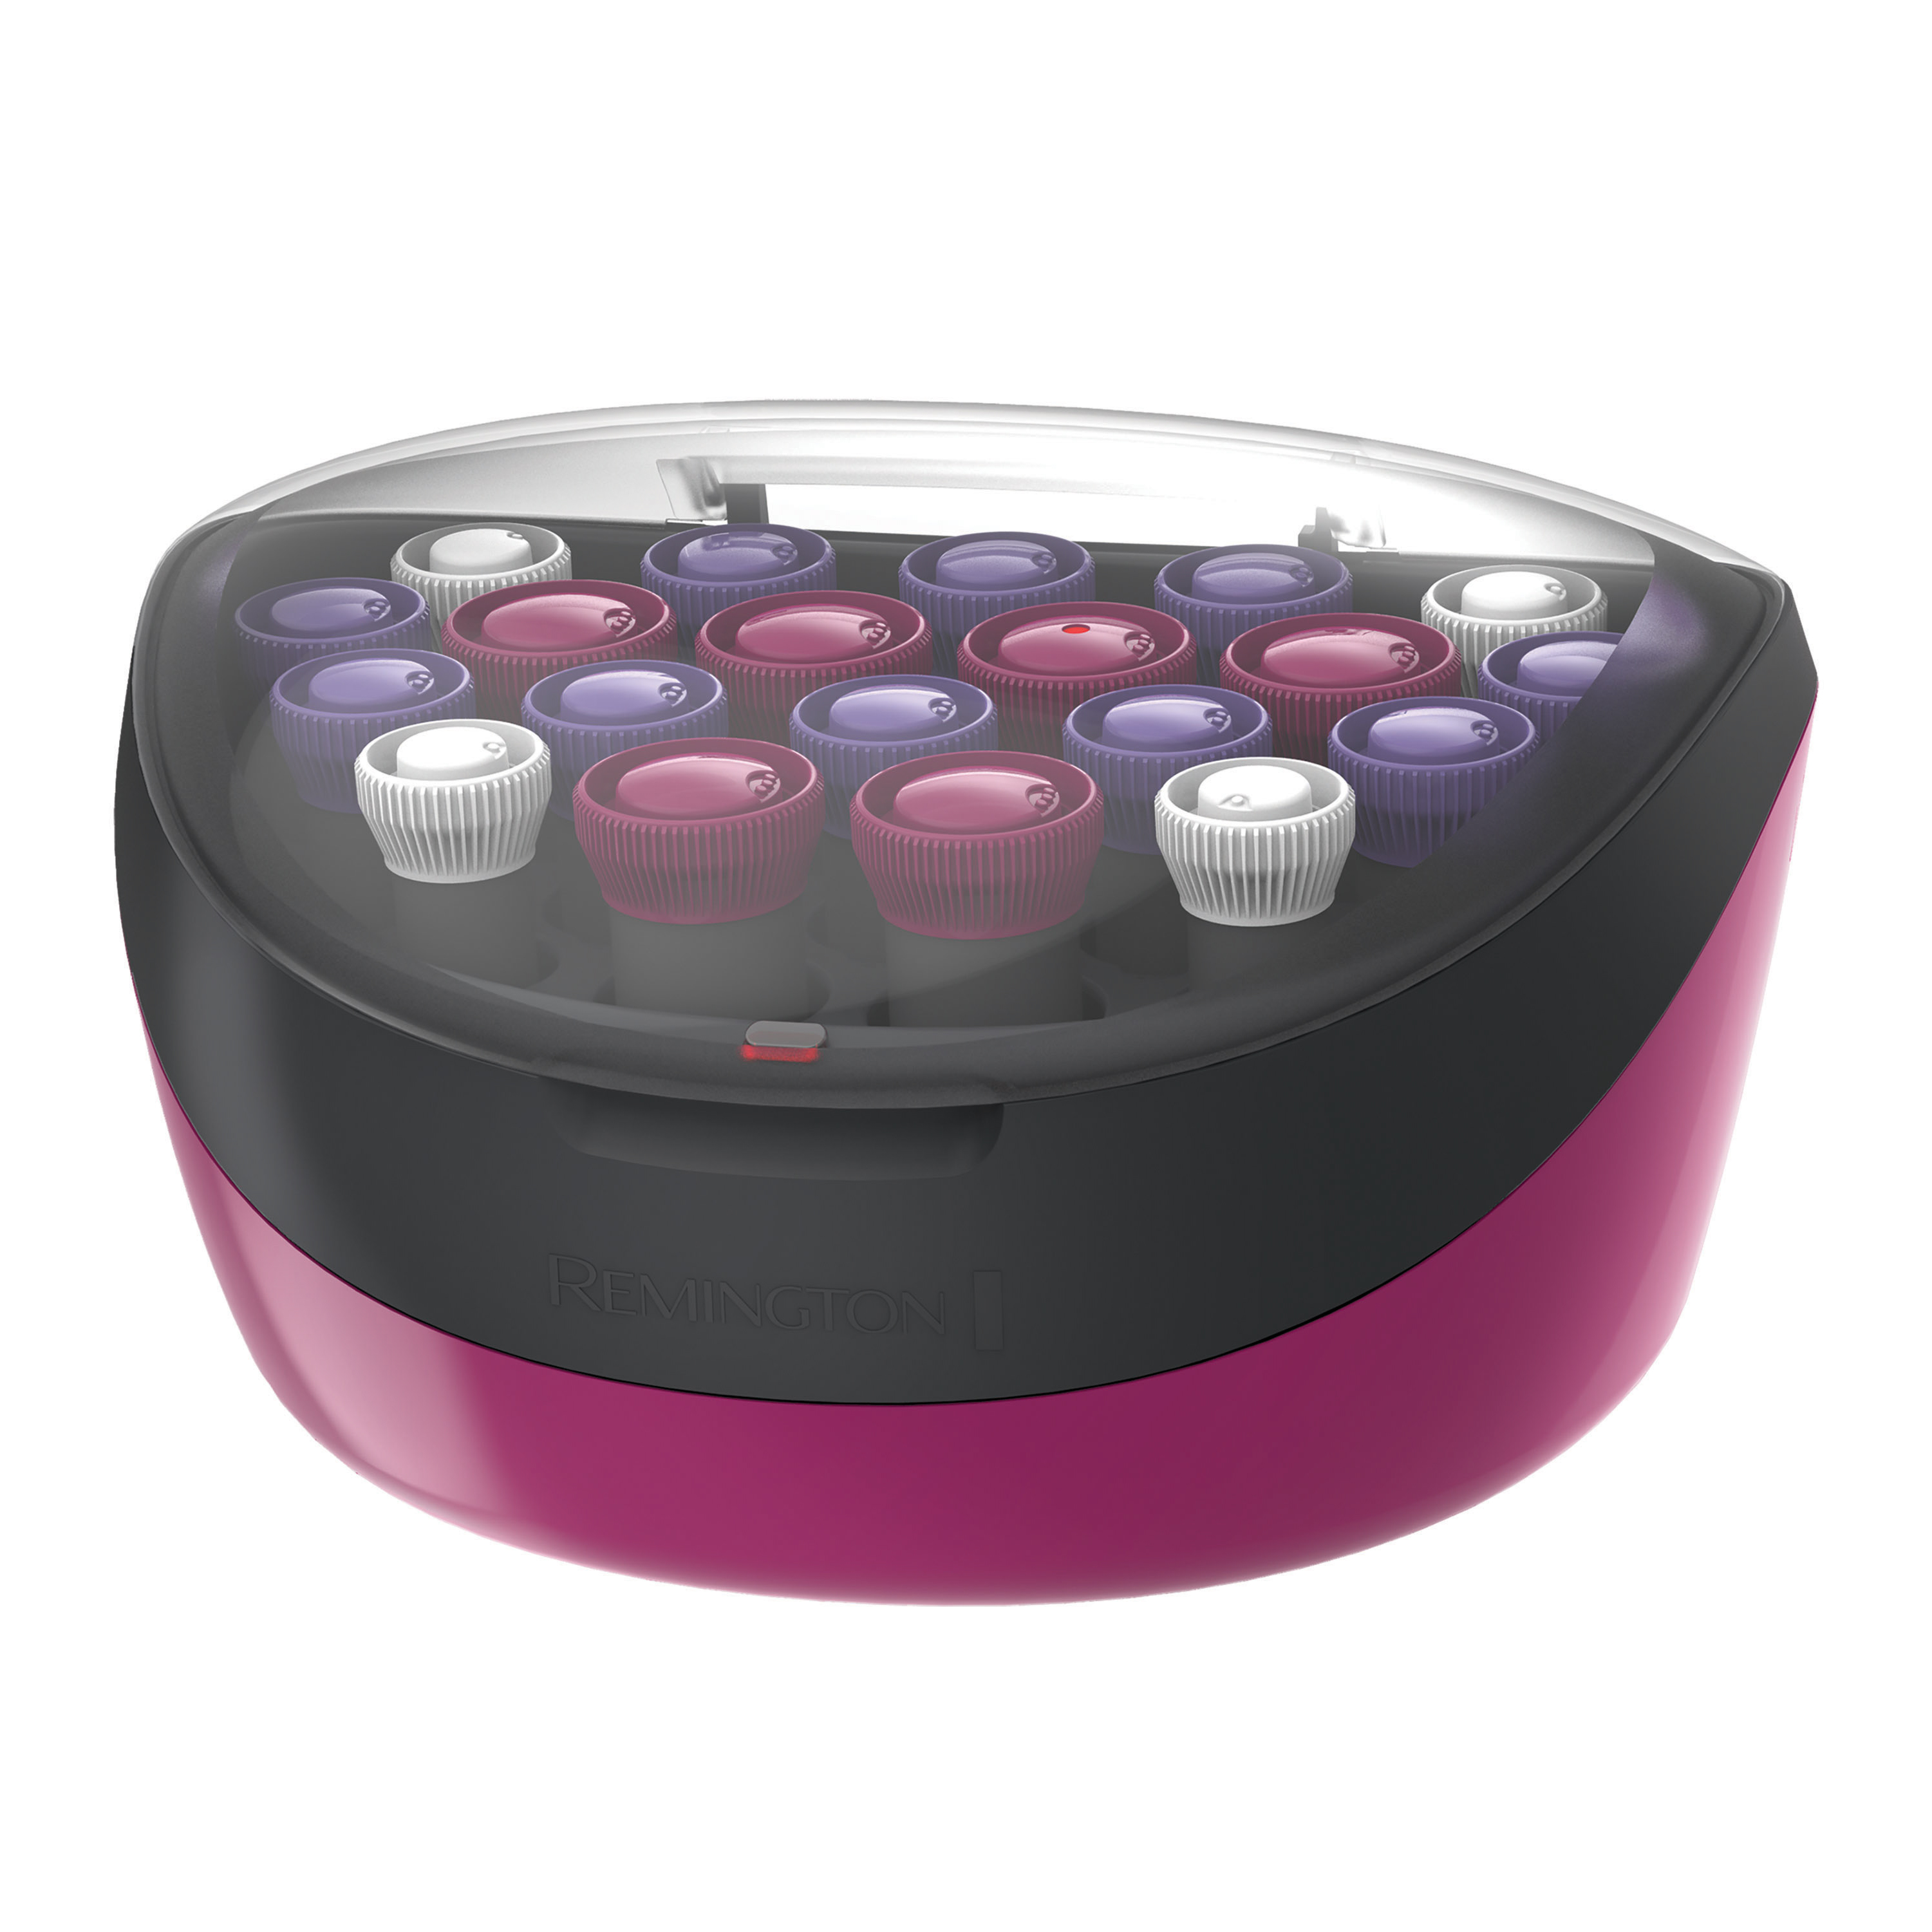 Remington Professional Ceramic Conditioning Hot Hair Rollers, 20 Piece Set, Ionic, Purple, H5600H - image 5 of 14